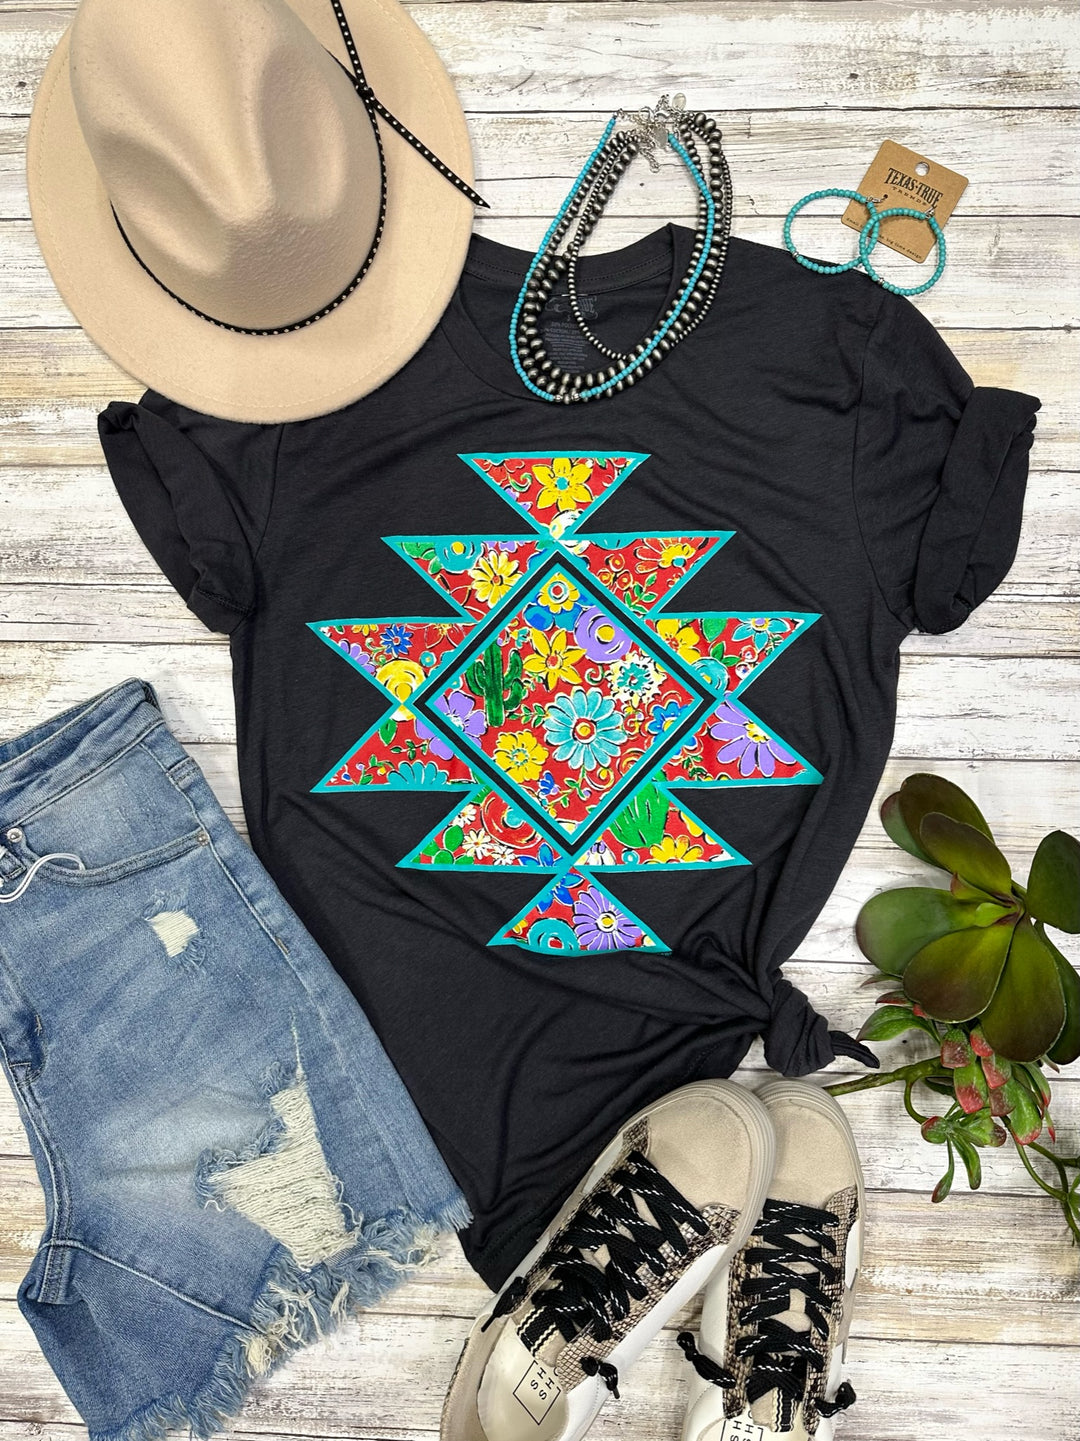 Barb's Floral Aztec Graphic Tee by Texas True Threads